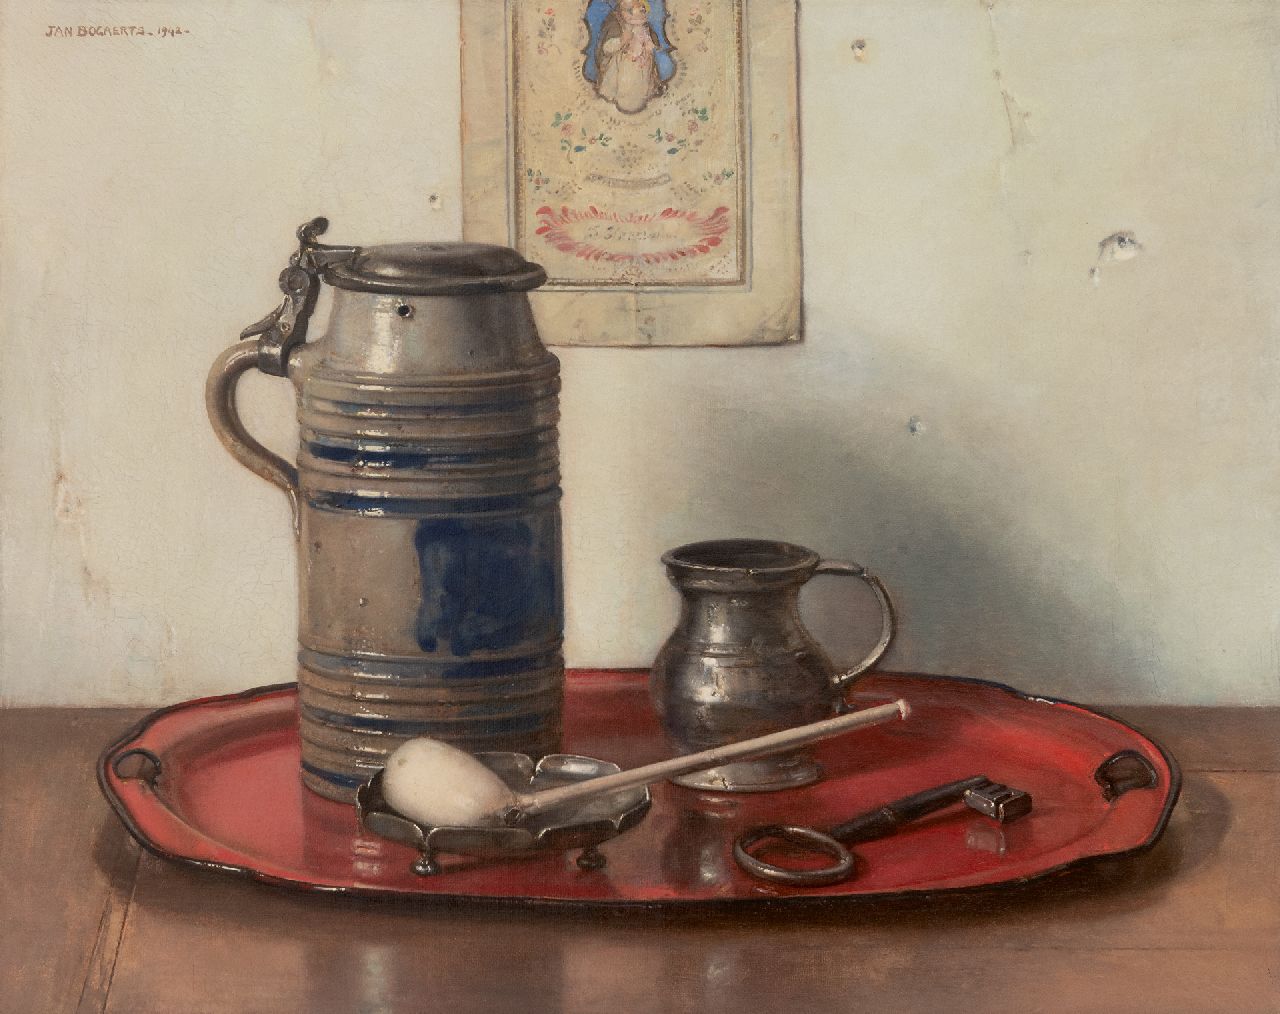 Bogaerts J.J.M.  | Johannes Jacobus Maria 'Jan' Bogaerts | Paintings offered for sale | Still life with a Cologne jug and a Gouda pipe, oil on canvas 40.3 x 50.0 cm, signed u.l. and dated 1942